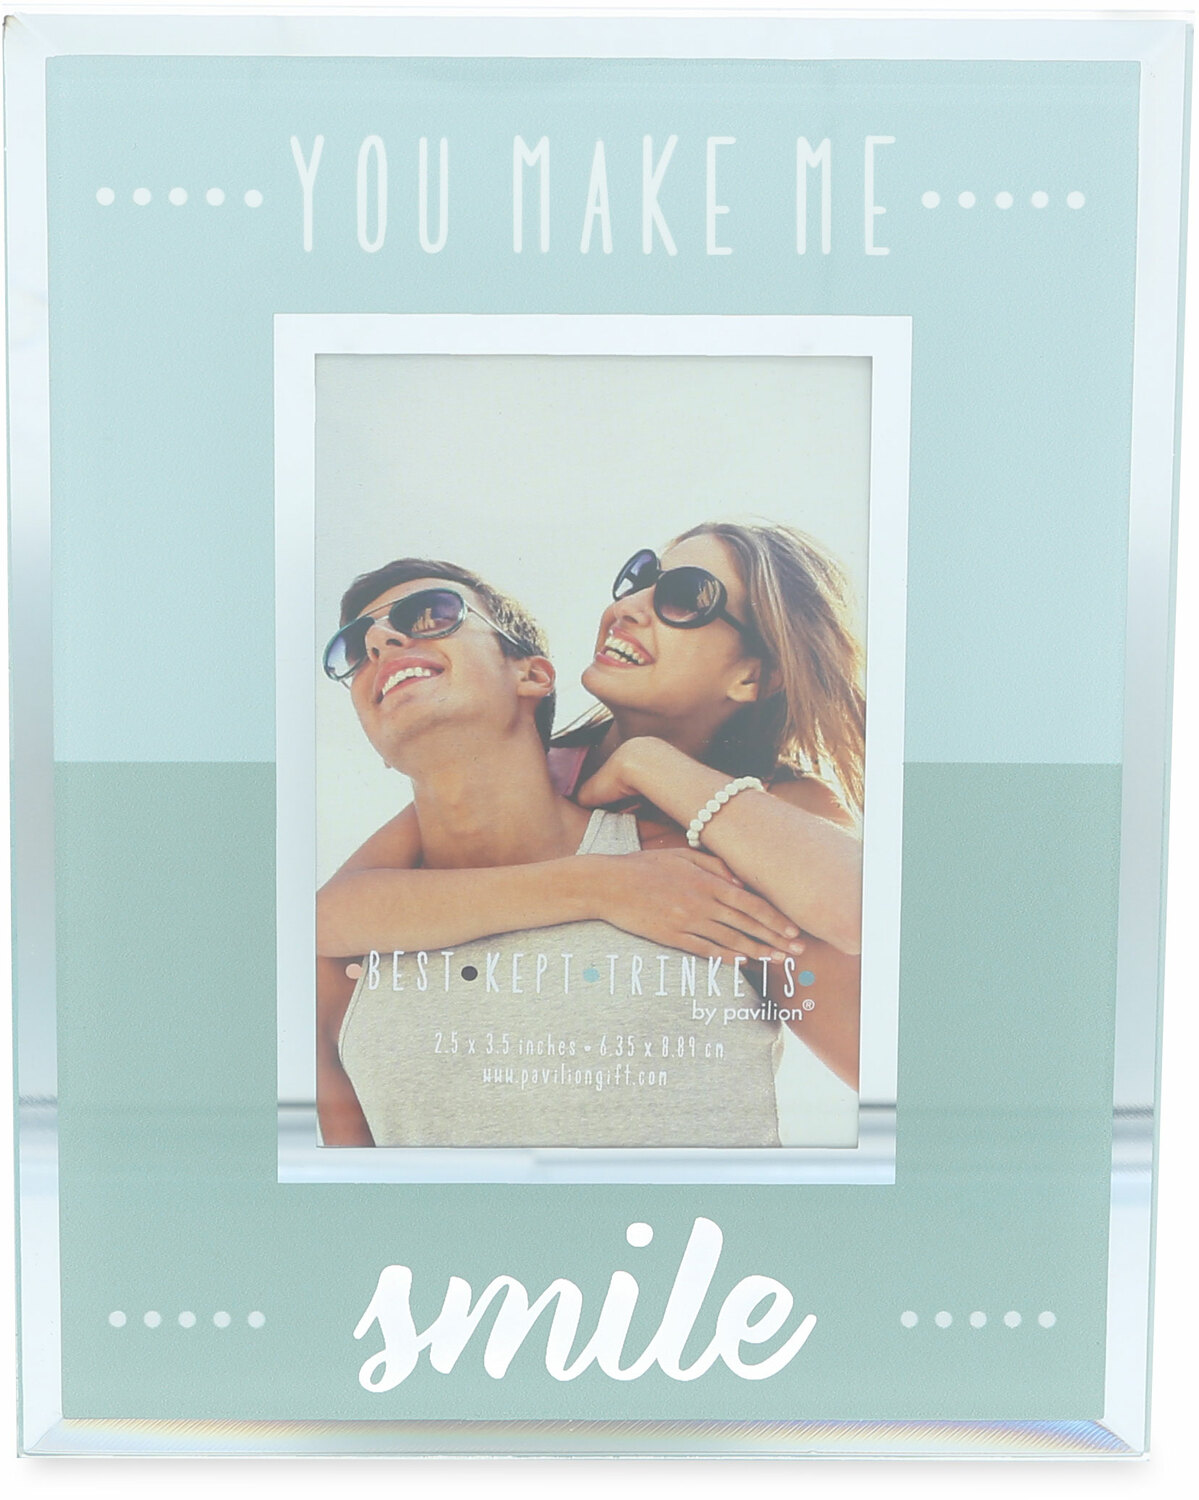 Smile by Best Kept Trinkets - Smile - 4.75" X 6" Frame
(Holds a 2.5" X 3.5" Photo)